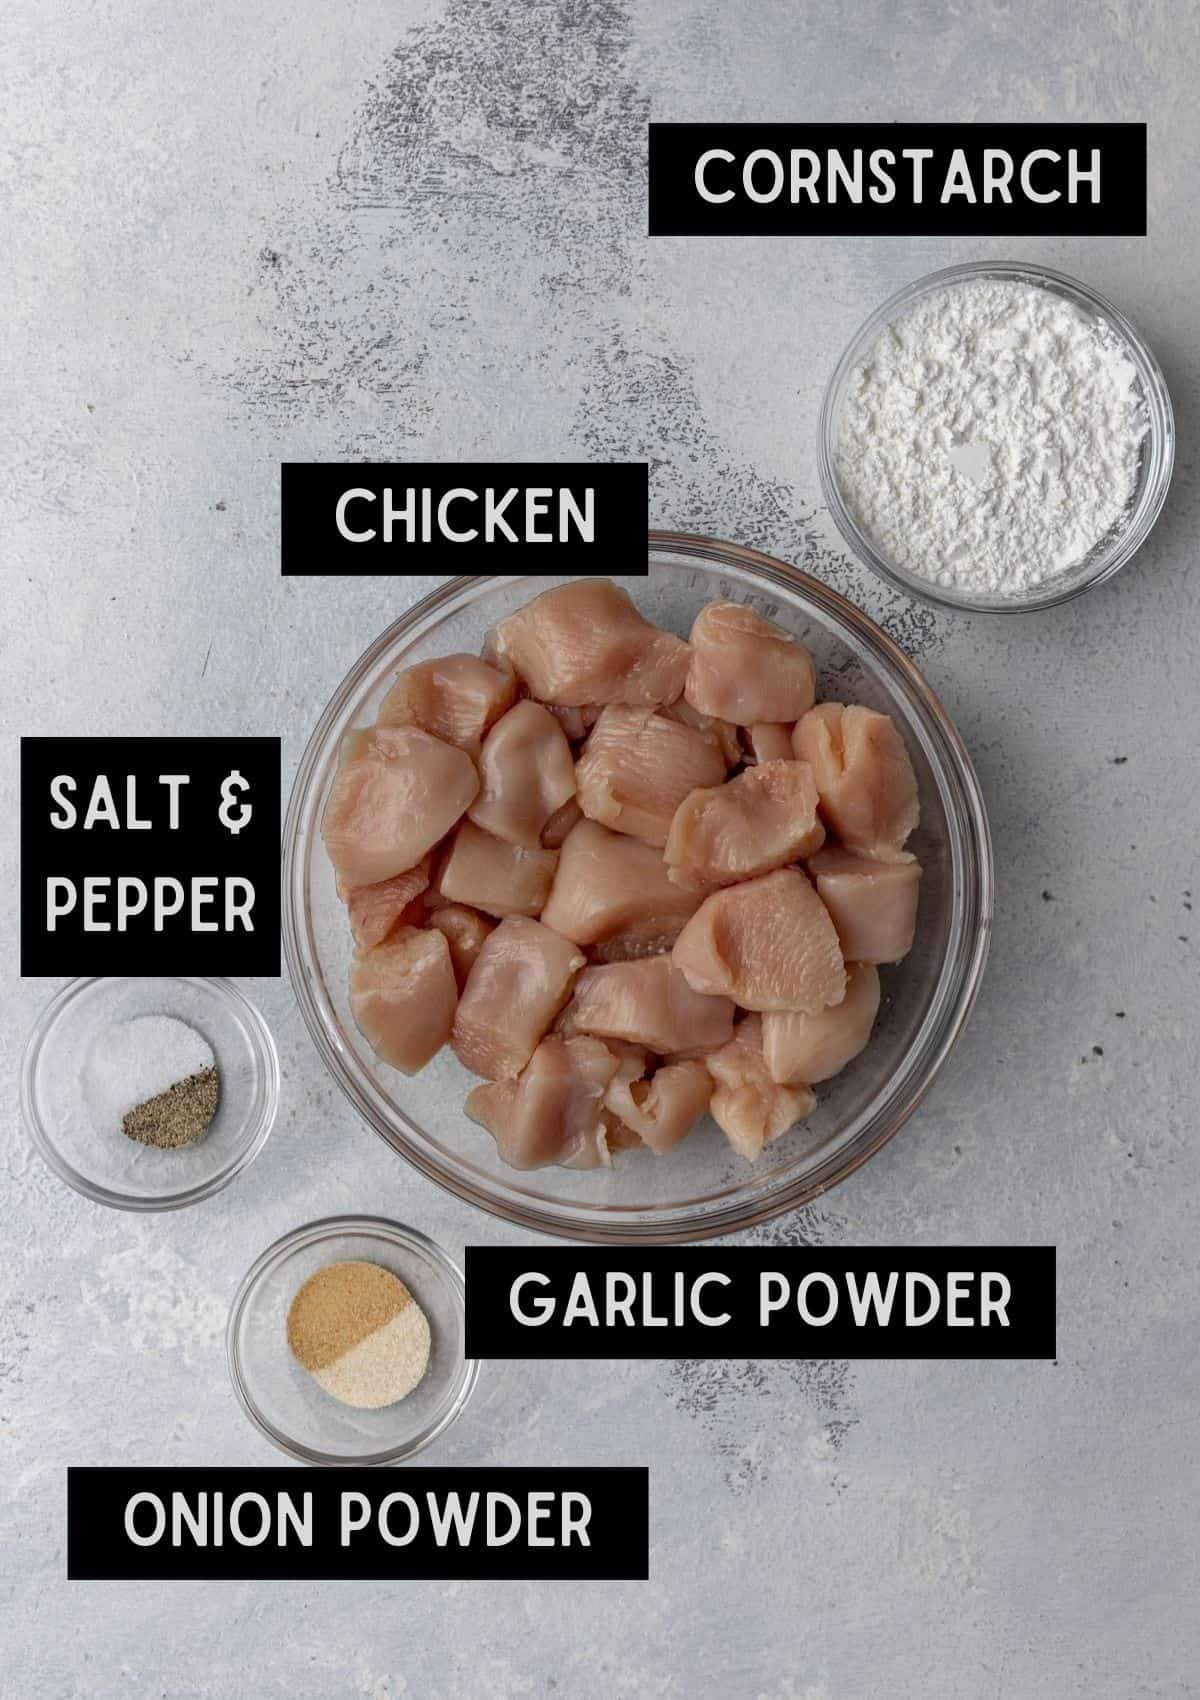 Labelled ingredients for crispy air fryer chicken (see recipe for details).